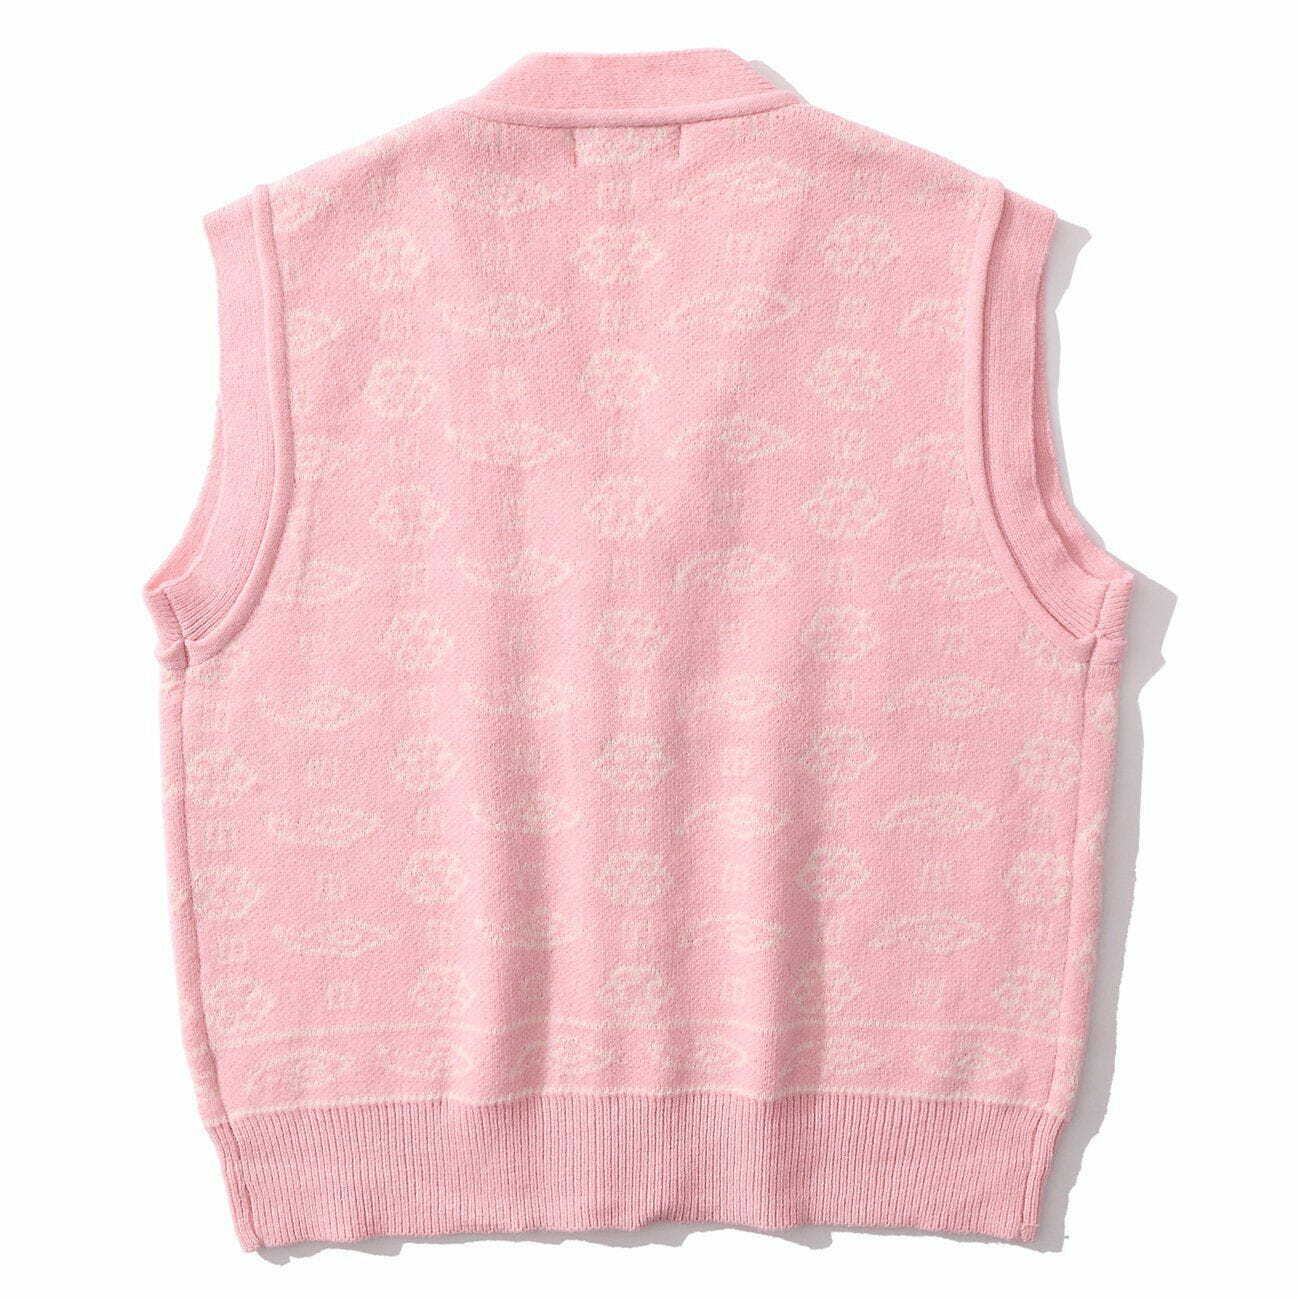 youthful floral knit vest edgy  retro streetwear essential 5057